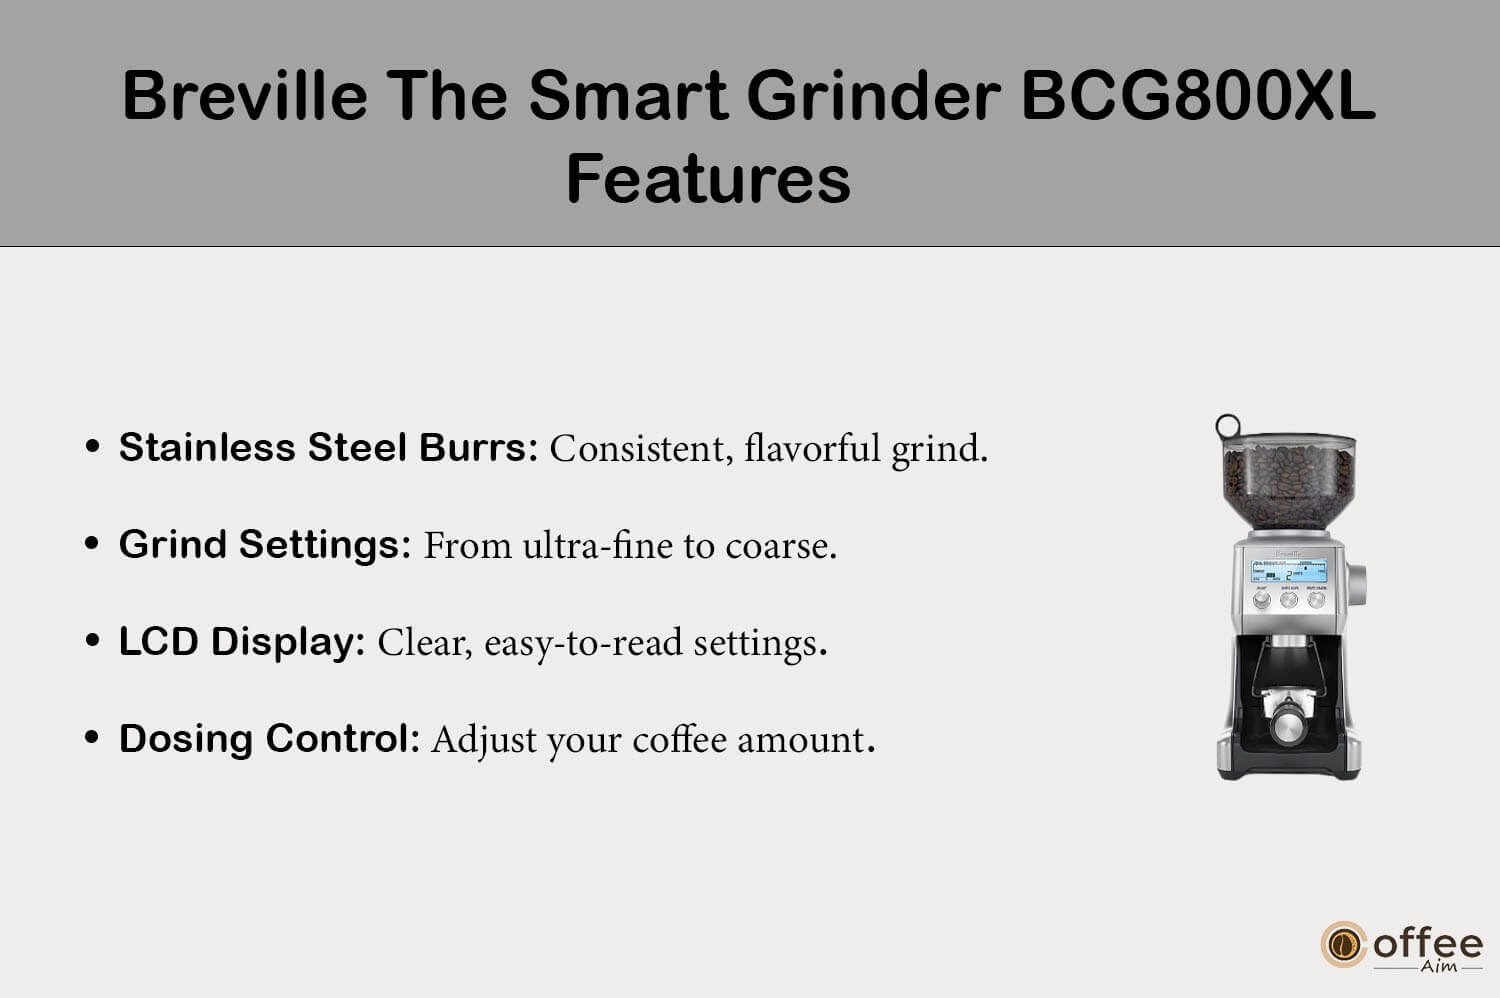 "This graphic showcases the features of 'Breville The Smart Grinder BCG800XL' as highlighted in the 'Breville The Smart Grinder BCG800XL Review' article."